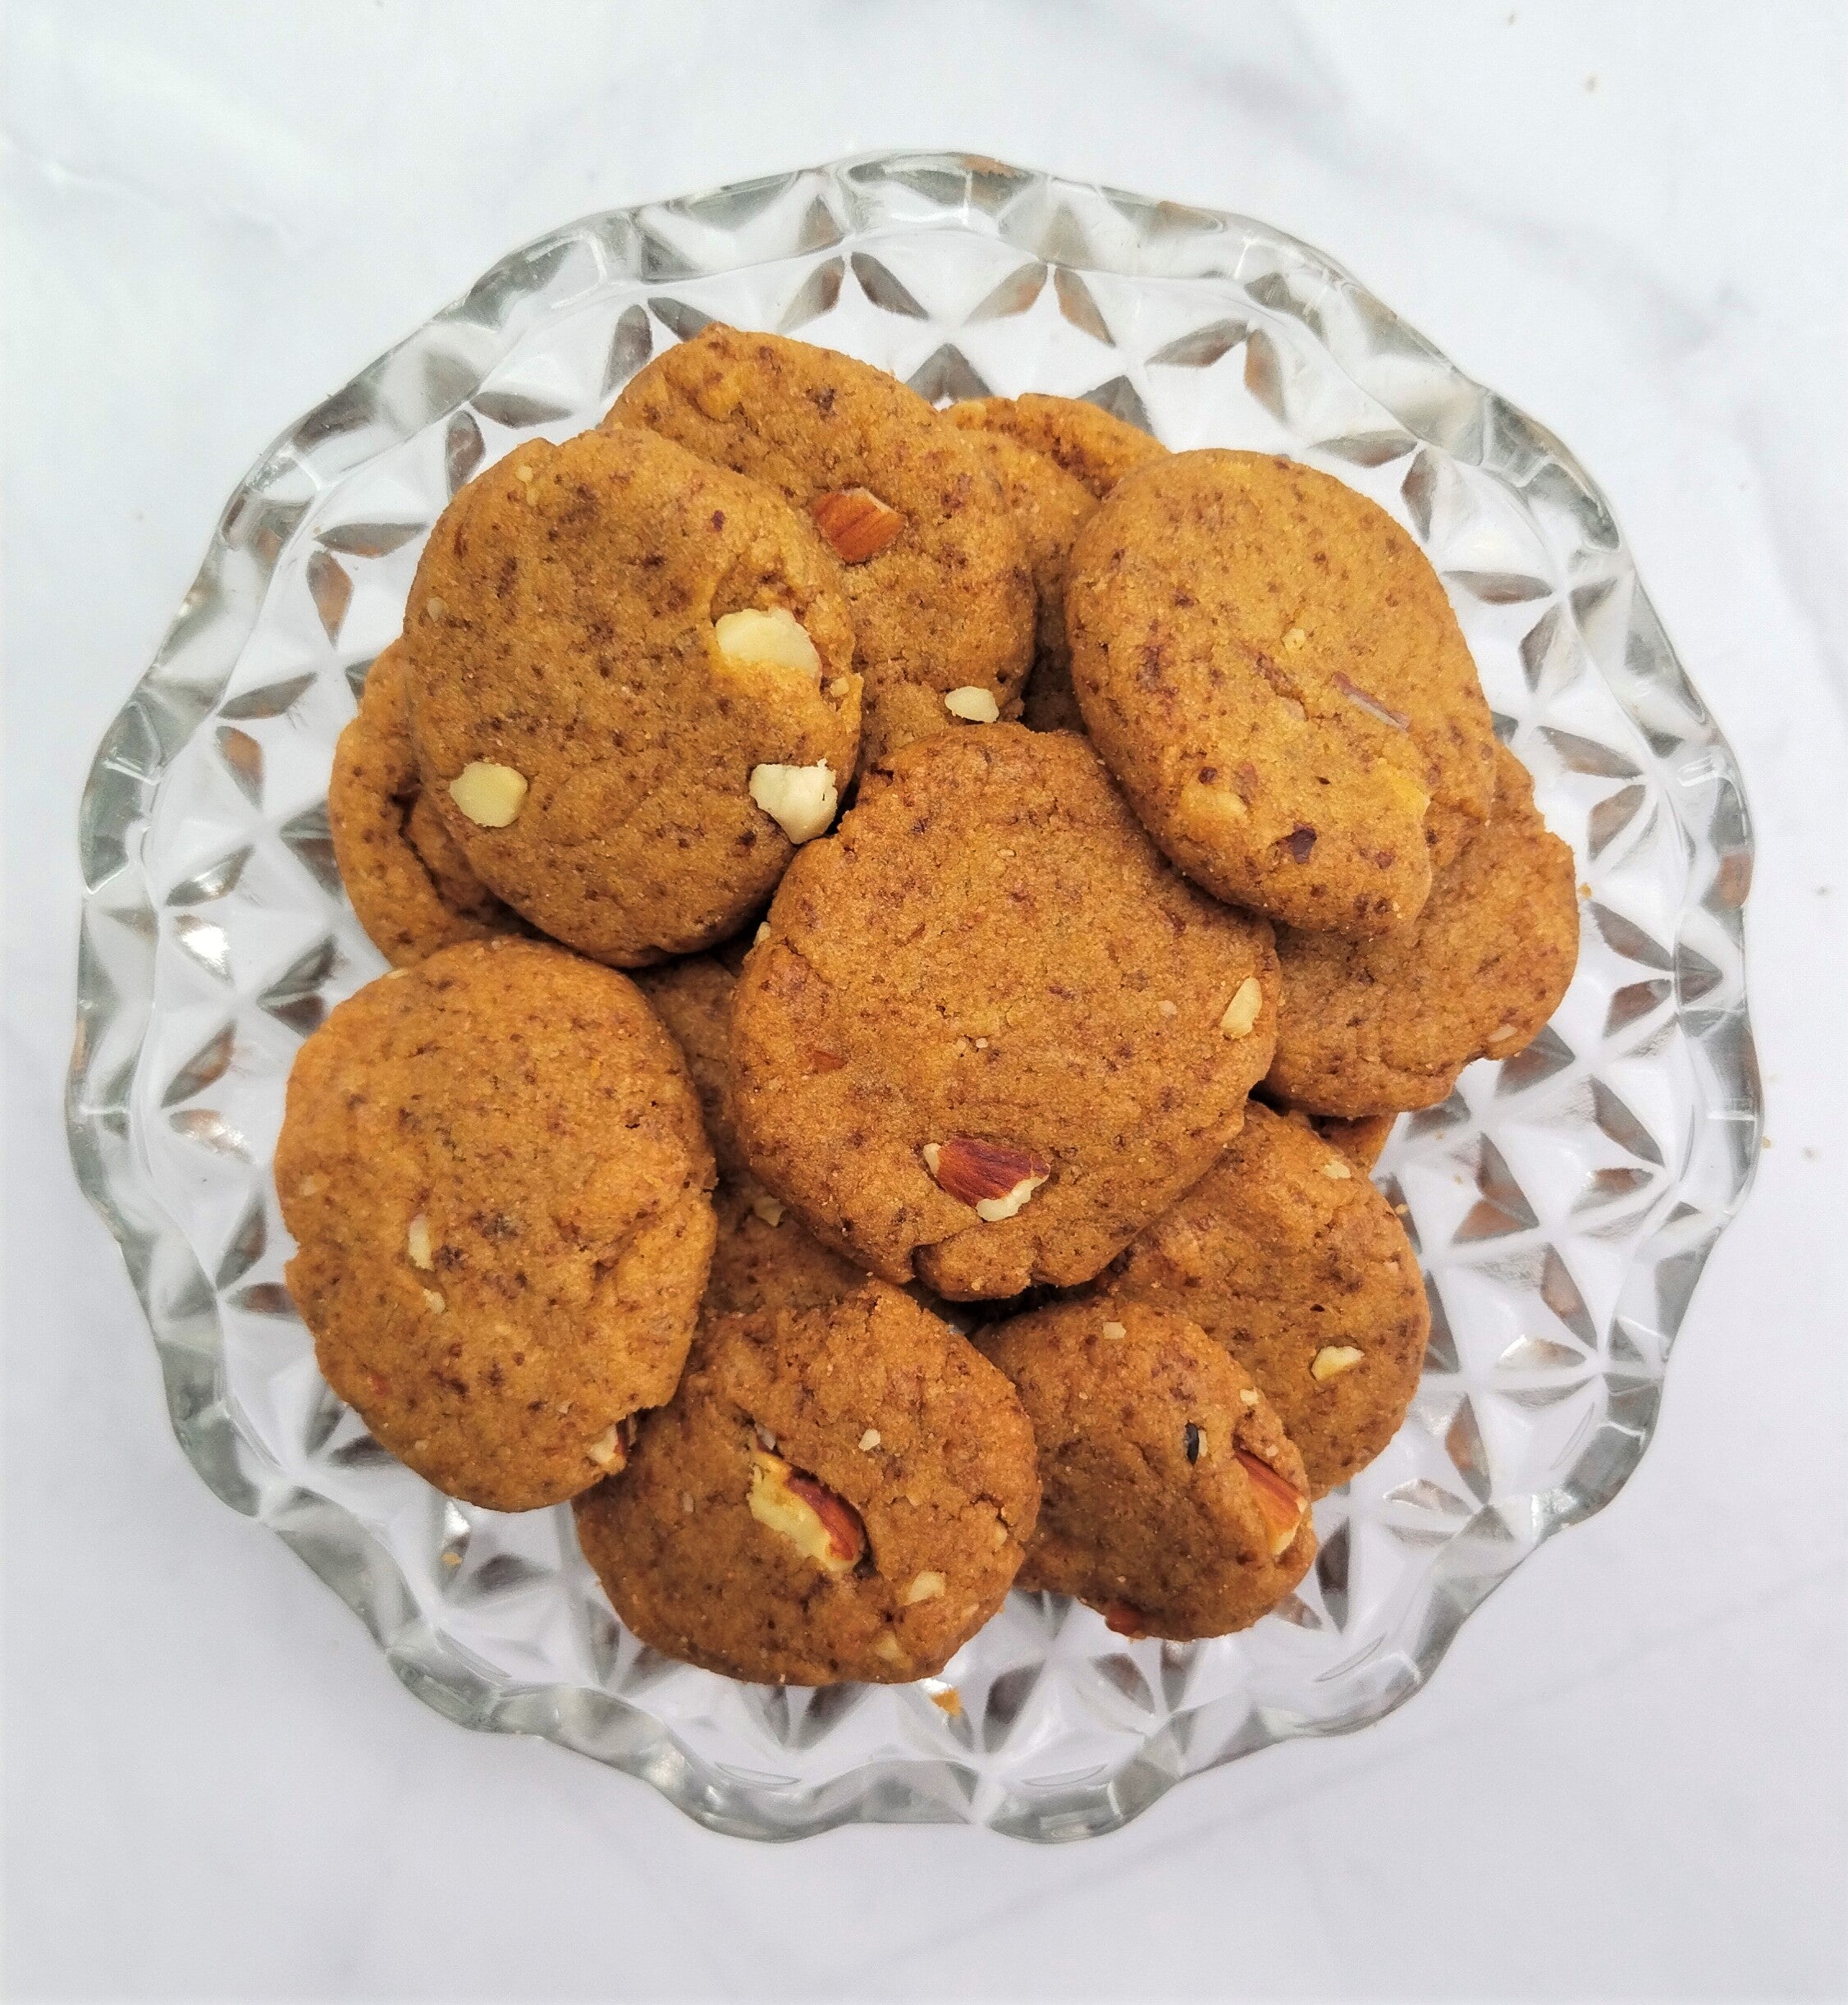 100% Whole Wheat Coffee Almond Cookies | Refined Sugar-Free | Eggless | No Maida | No Preservatives | Fibre Rich | 180g x 2 Pack